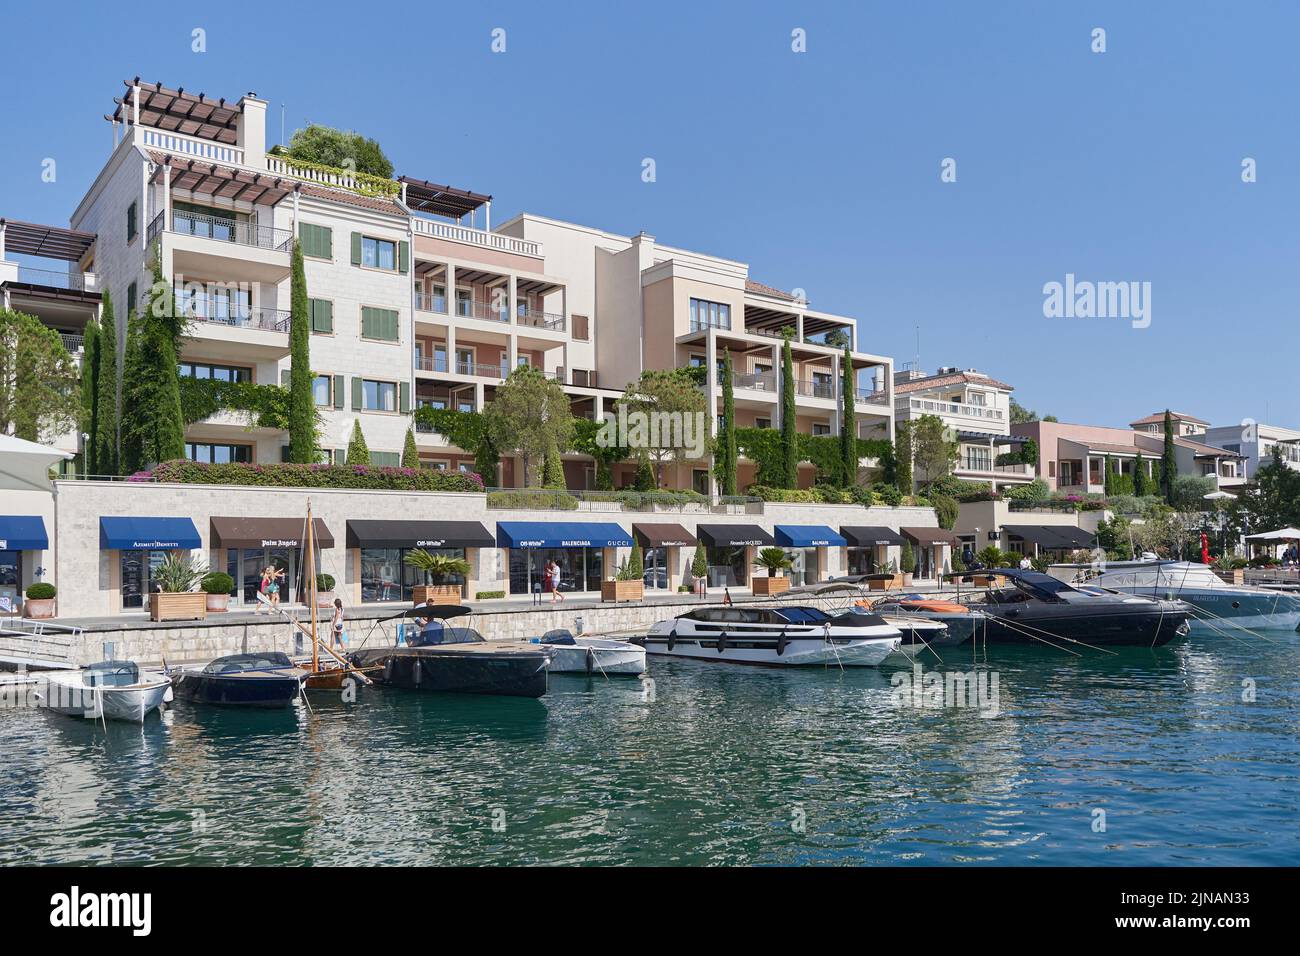 View of luxury resort with yachts and real estate Stock Photo